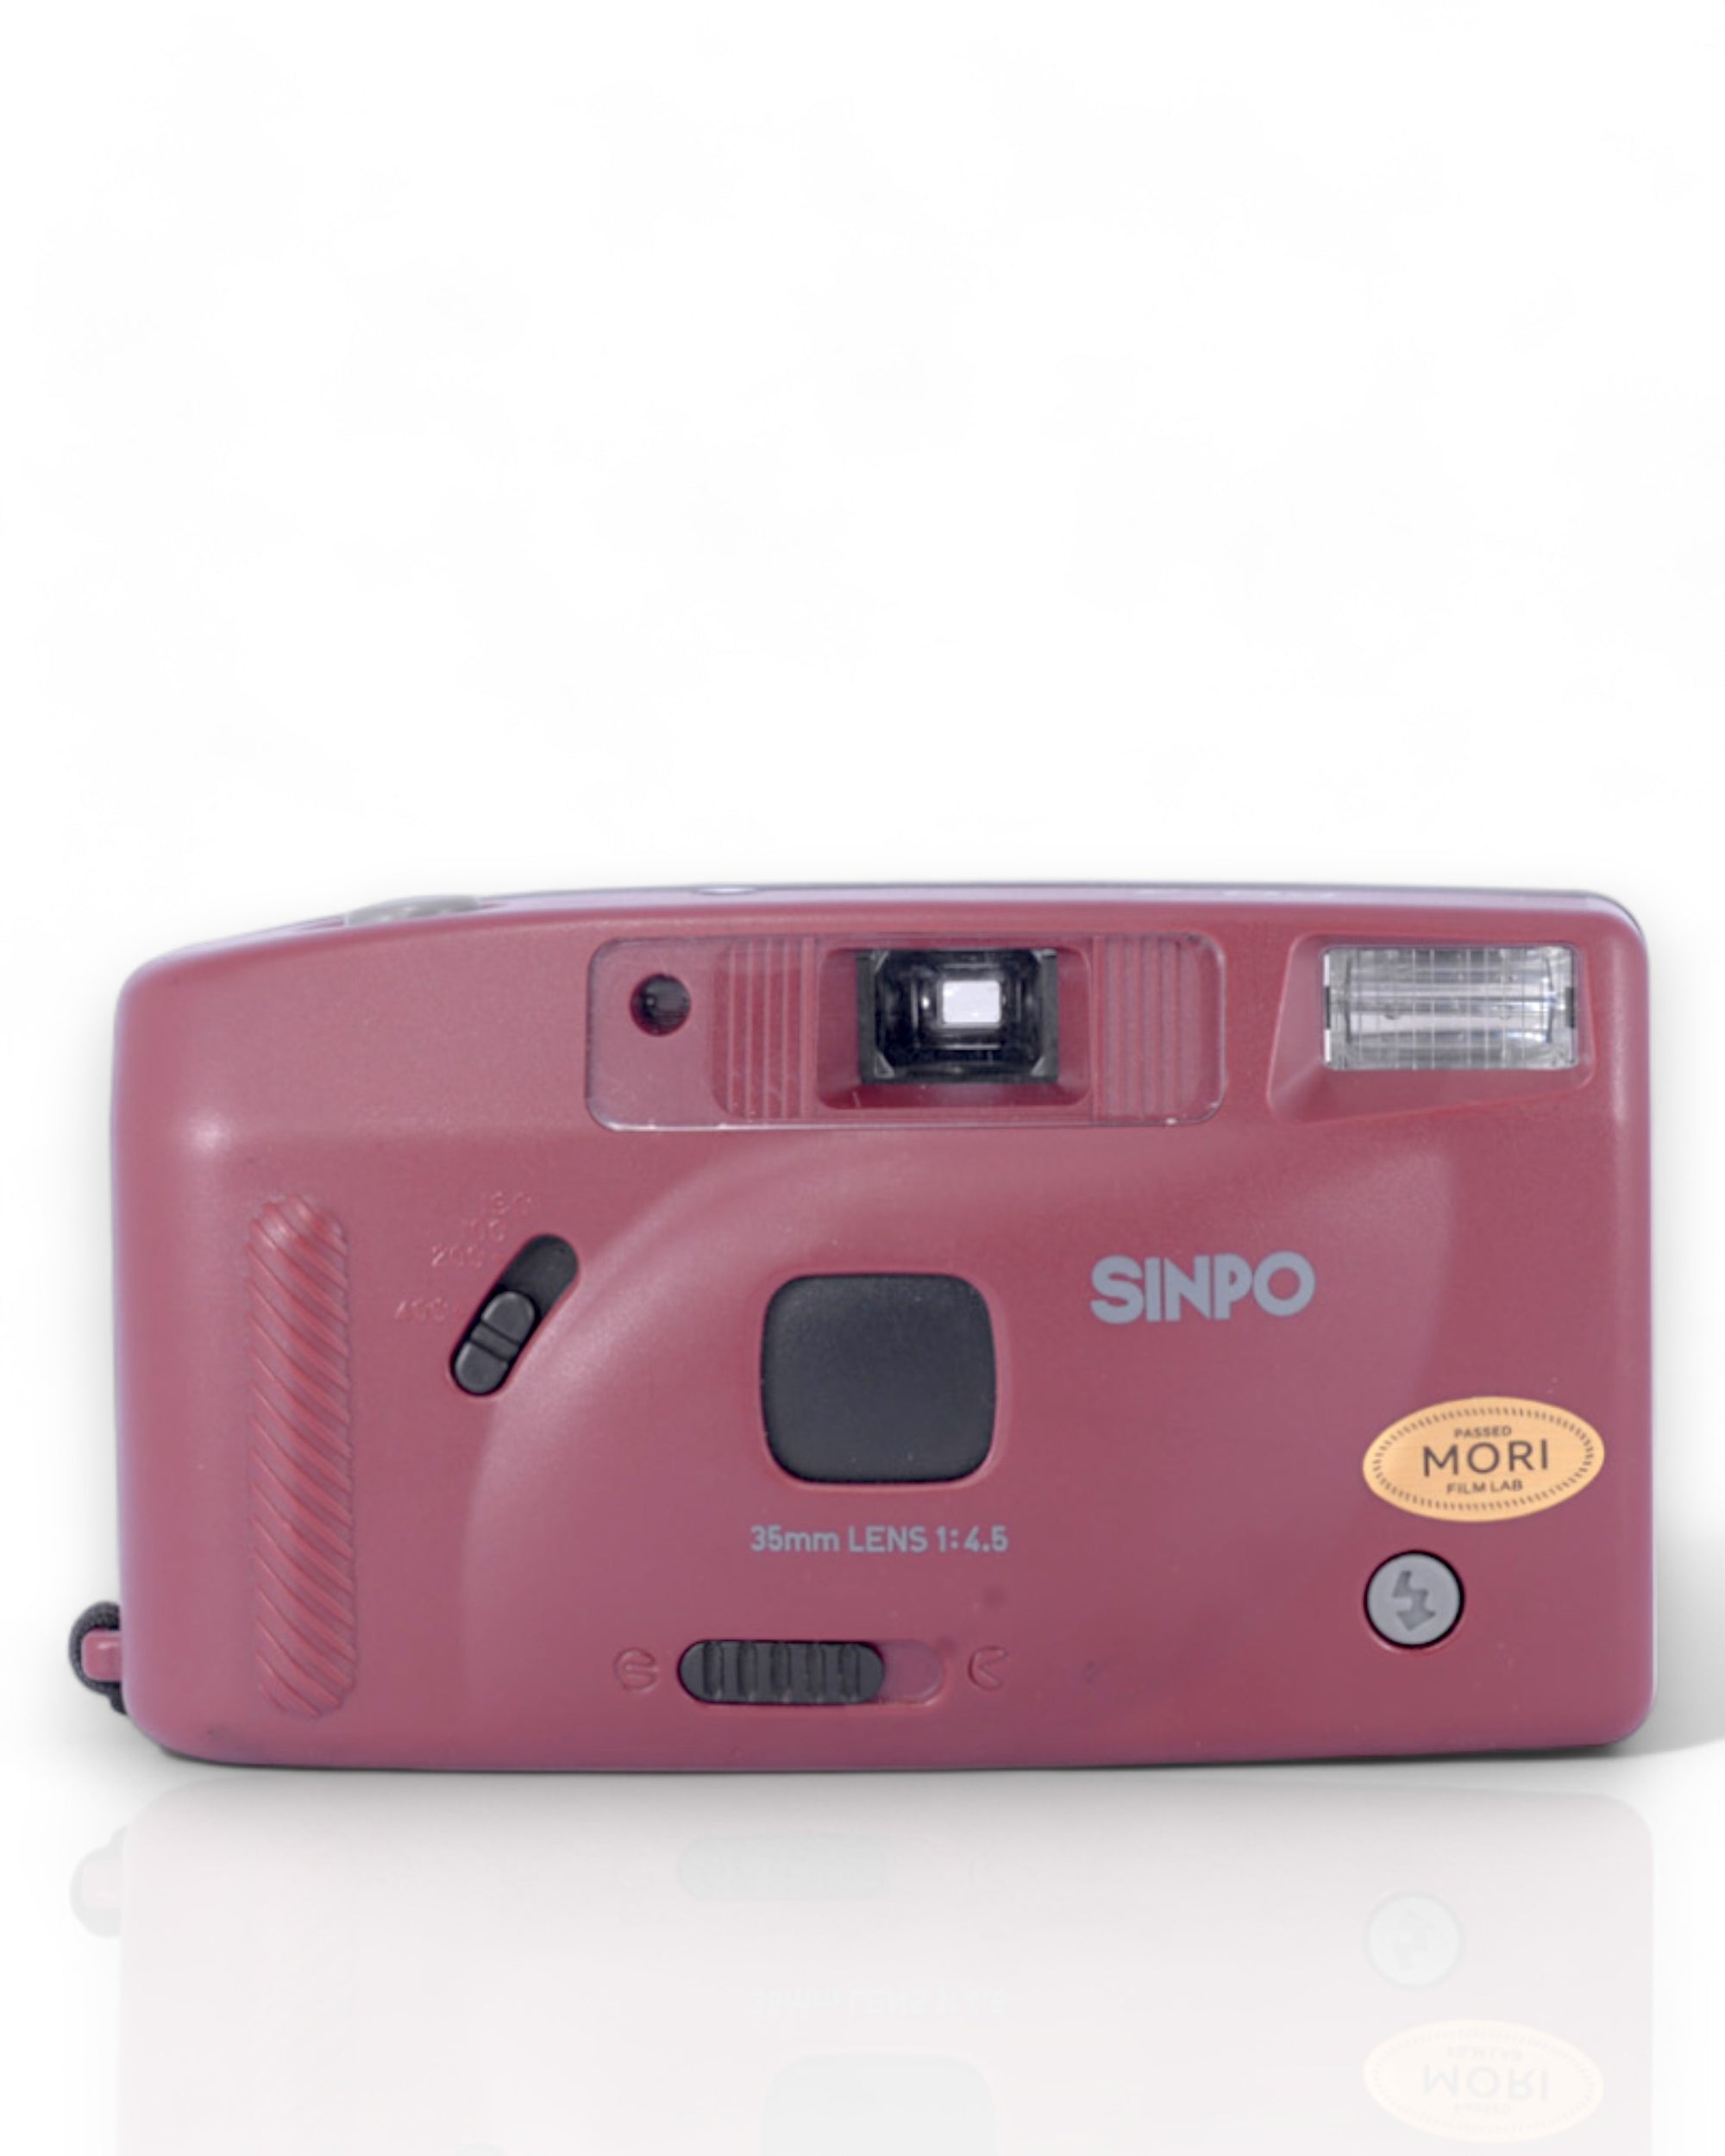 Sinpo PQ-3 35mm point & shoot film camera with 35mm lens